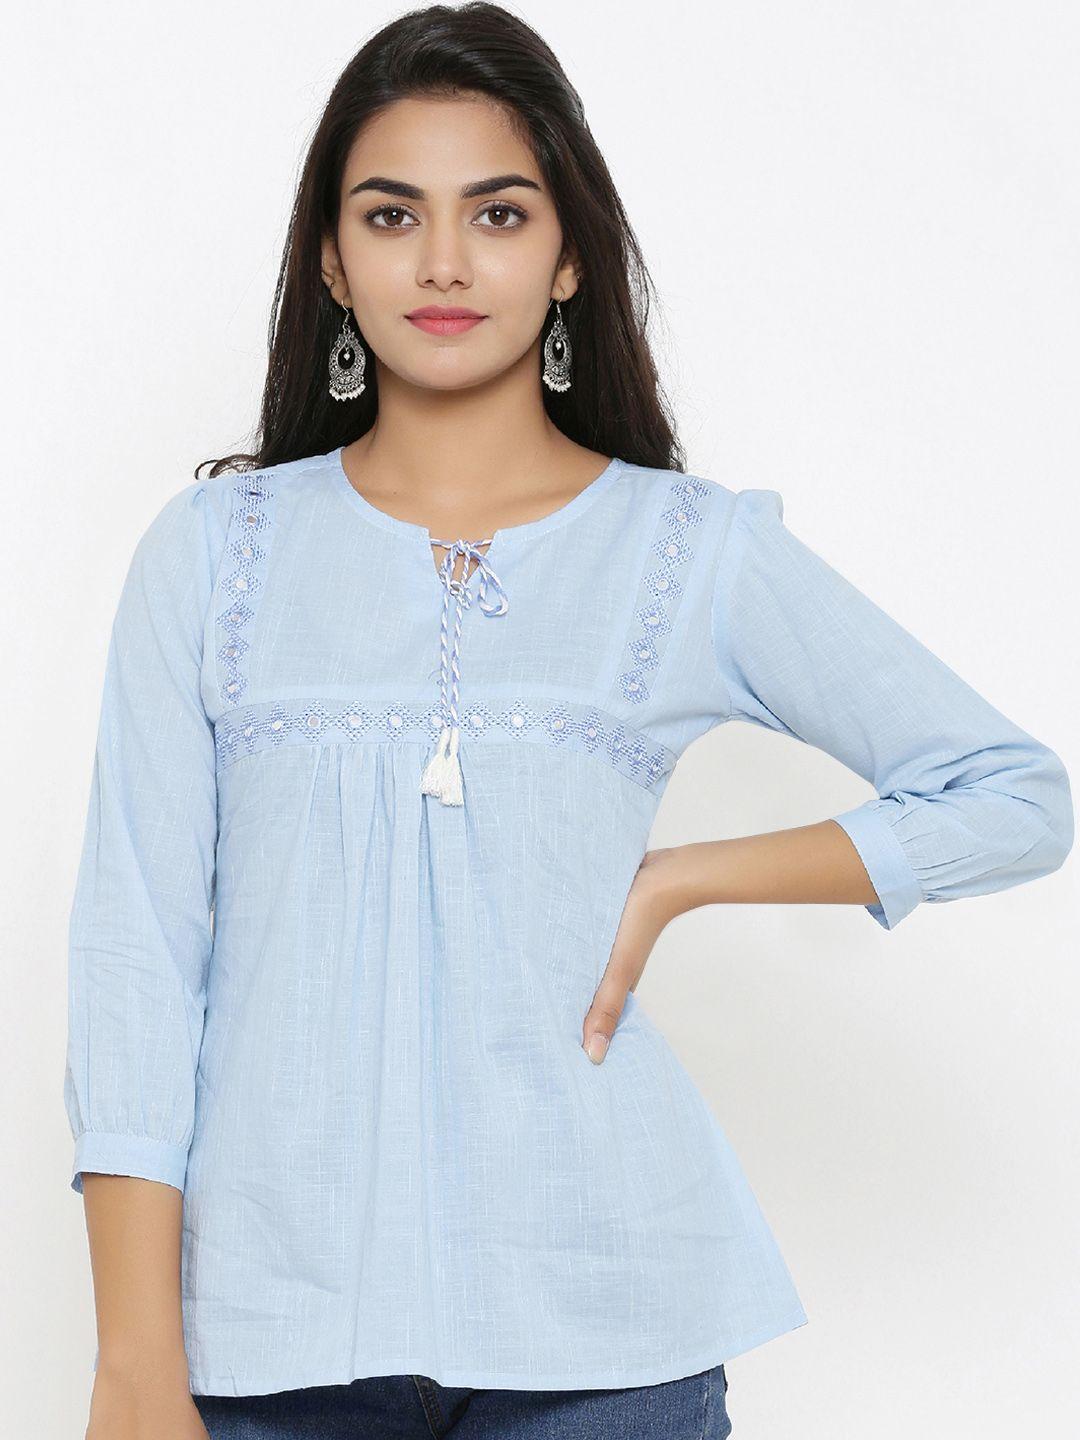 yash gallery women blue embroidered pure cotton top